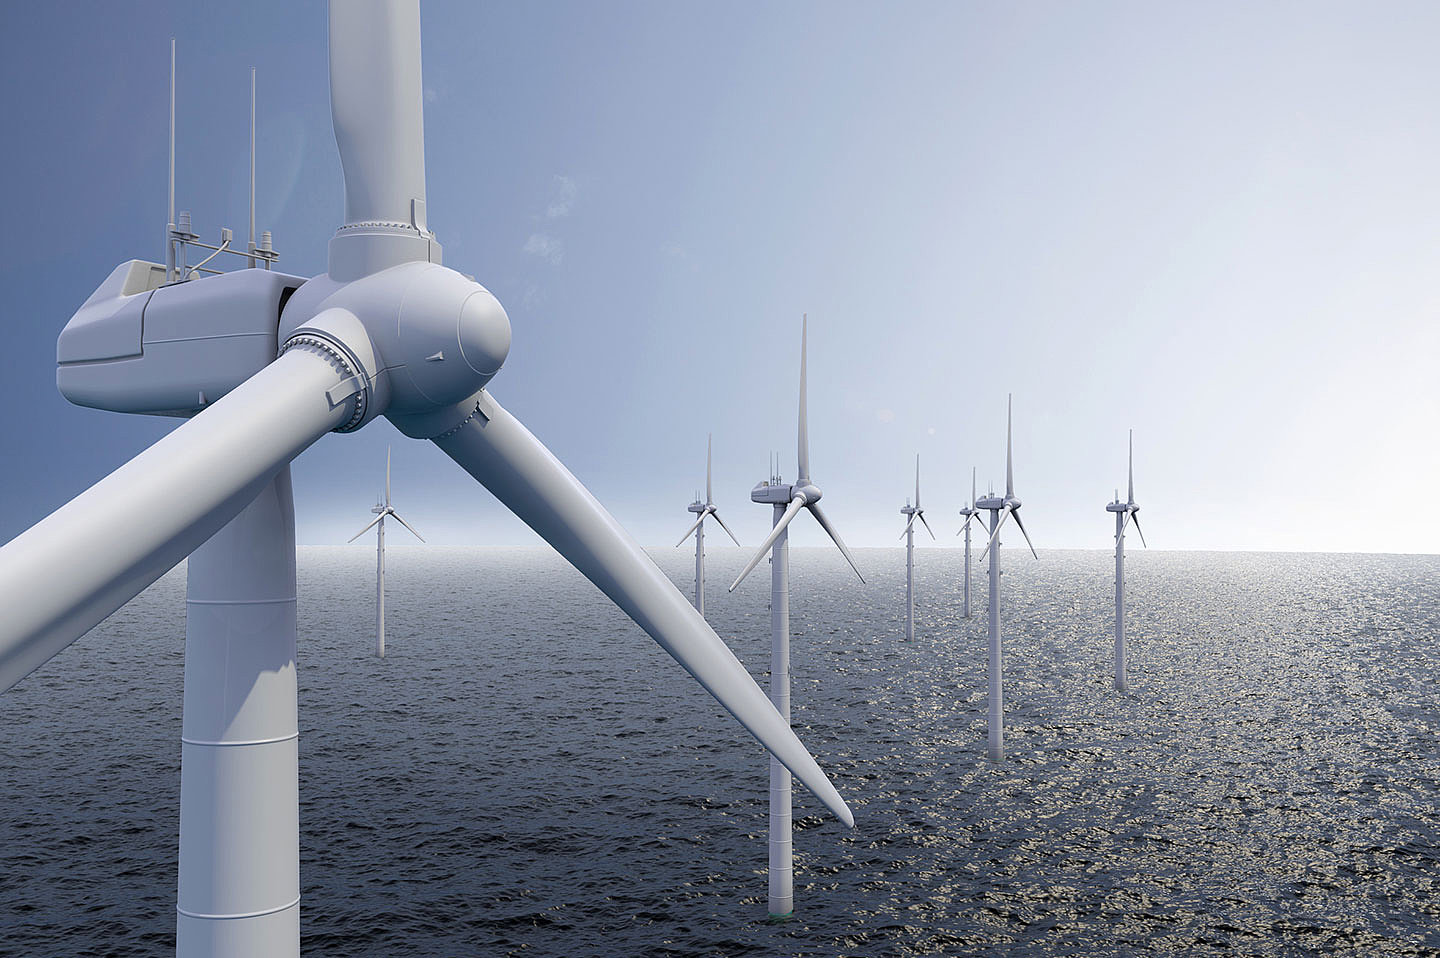 Blum-Novotest is also represented in the wind power and energy sector